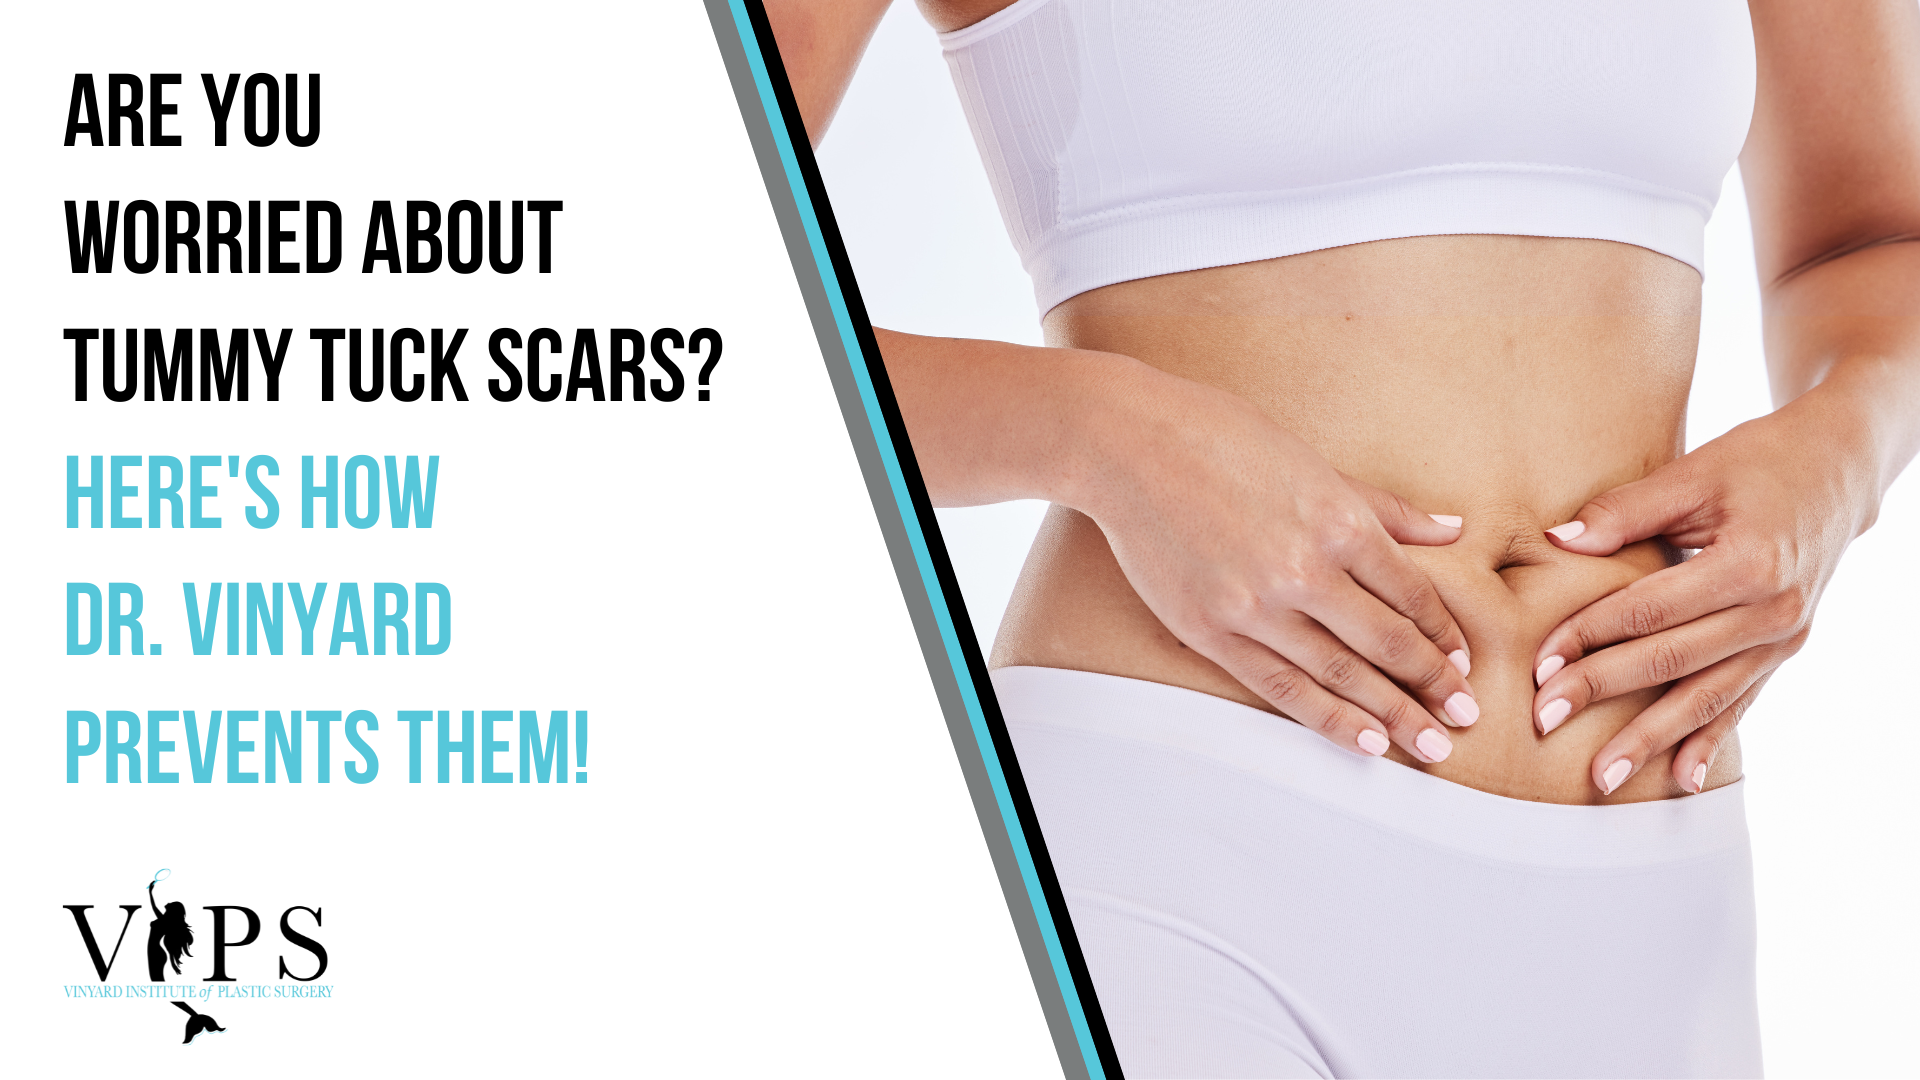 Are You Worried About Tummy Tuck Scars? Here's How Dr. Vinyard